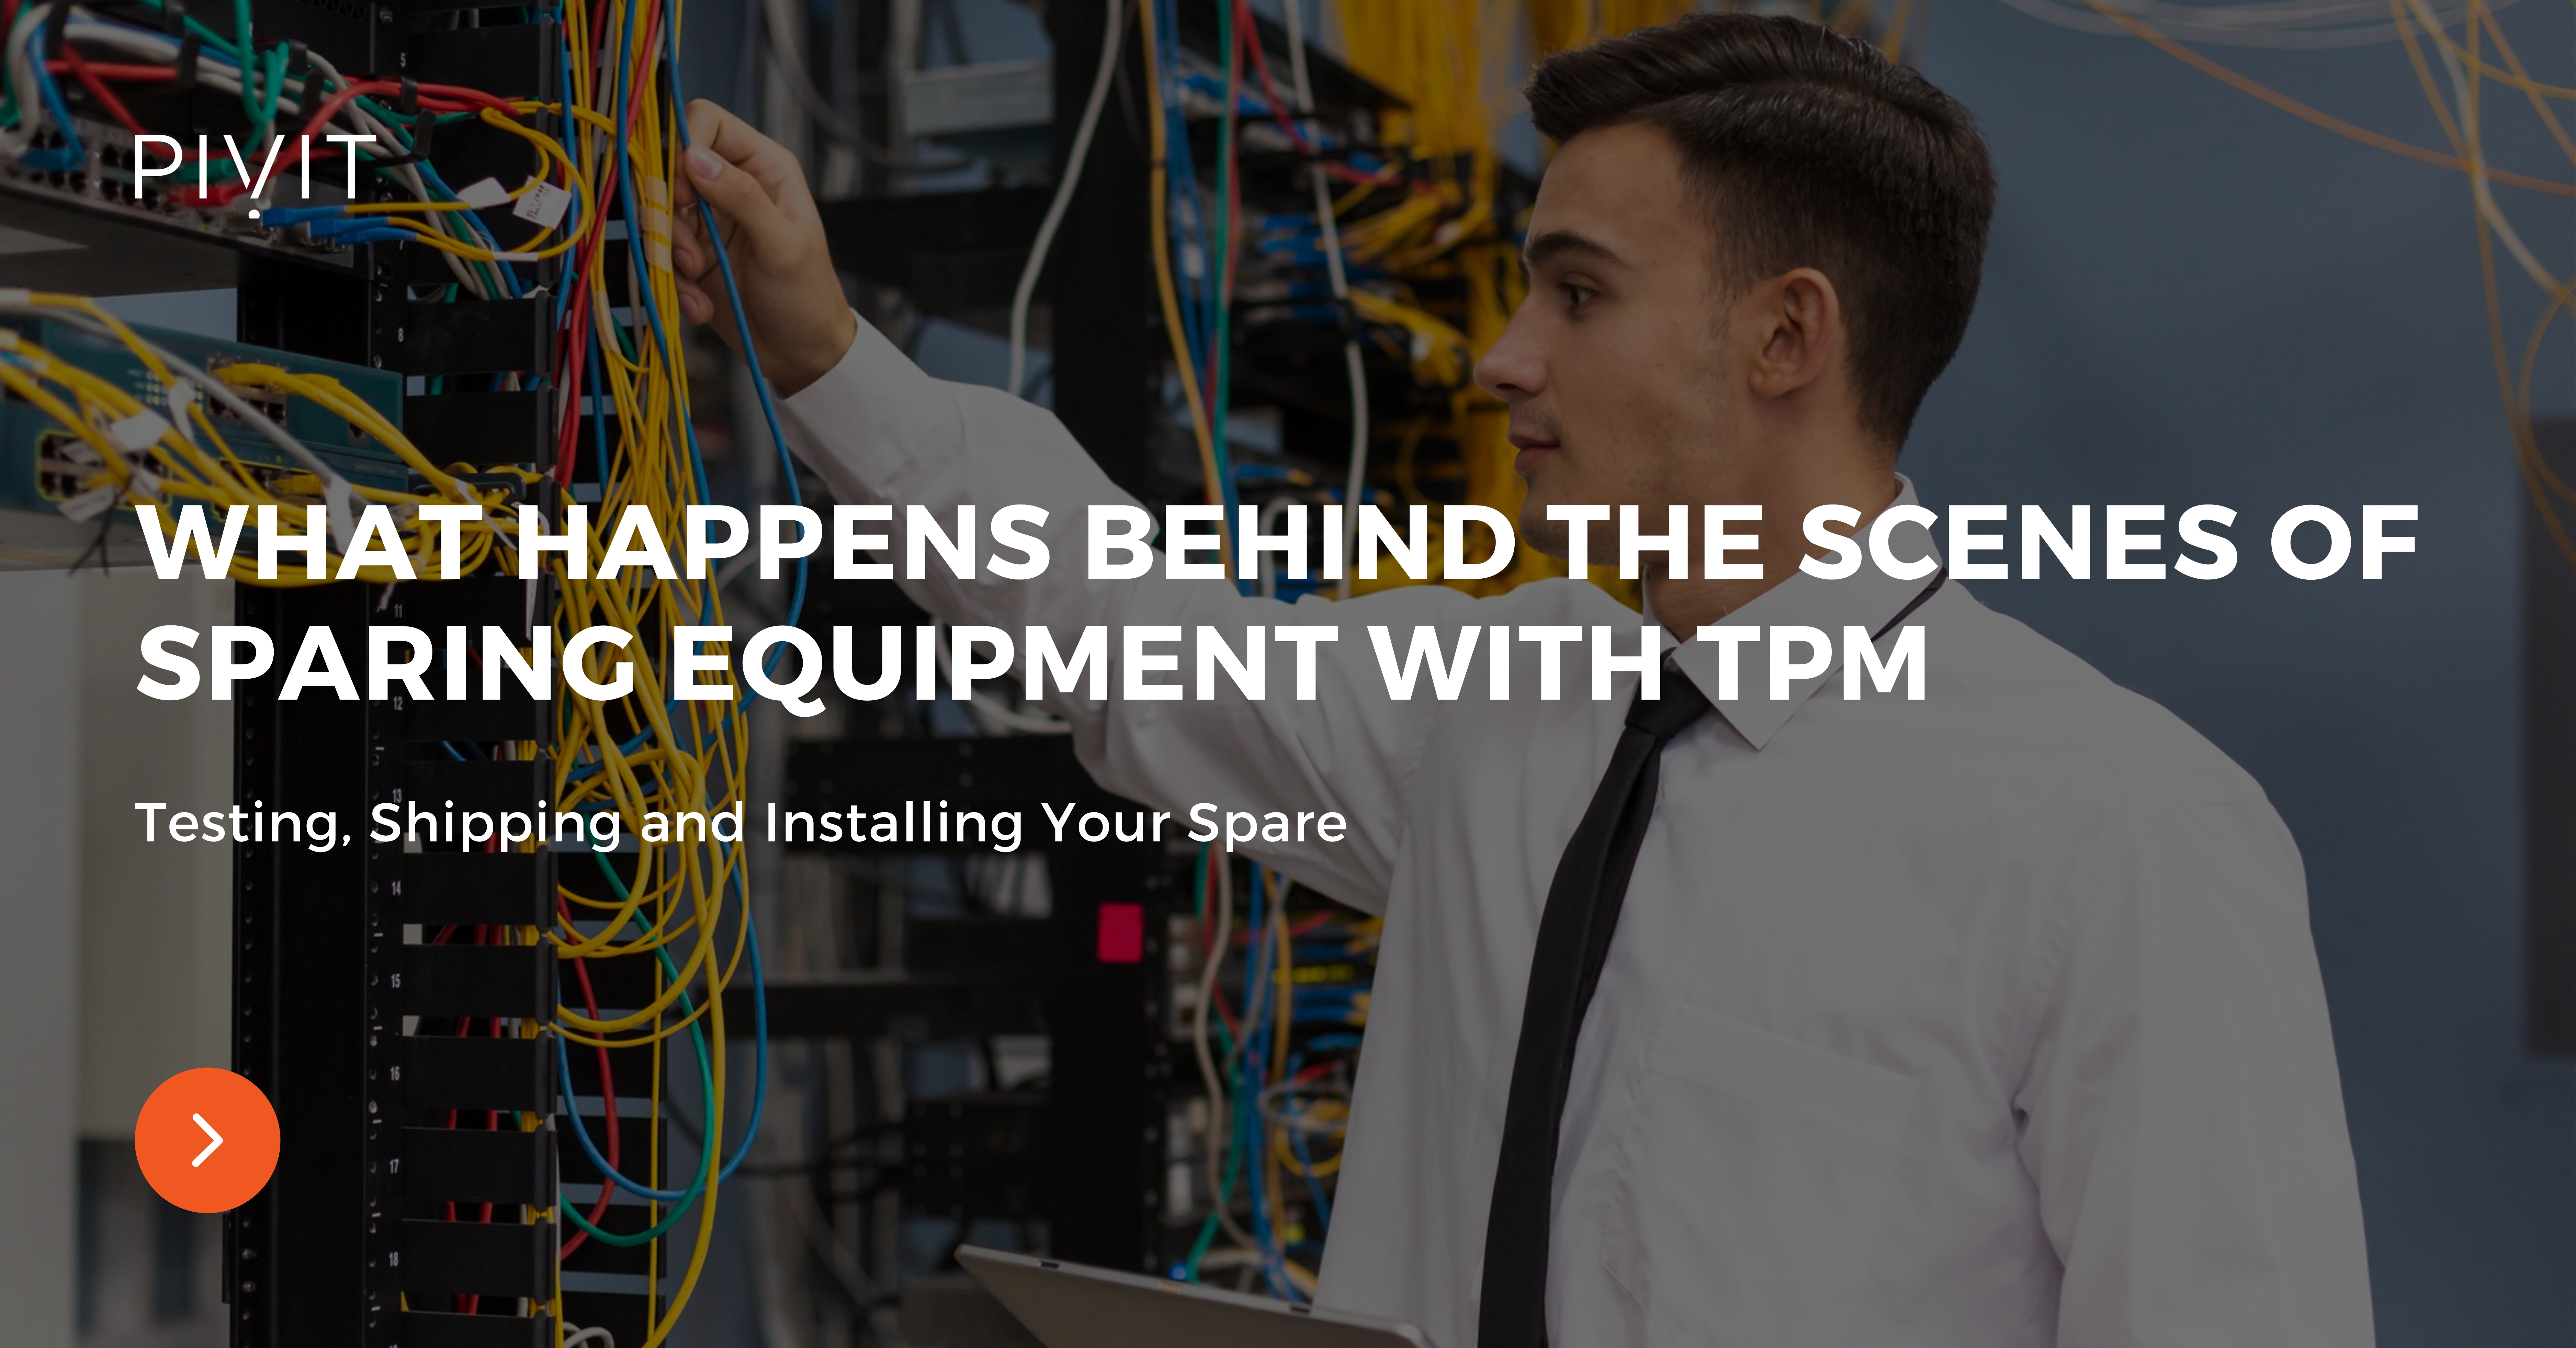 What Happens Behind the Scenes of Sparing Equipment with TPM